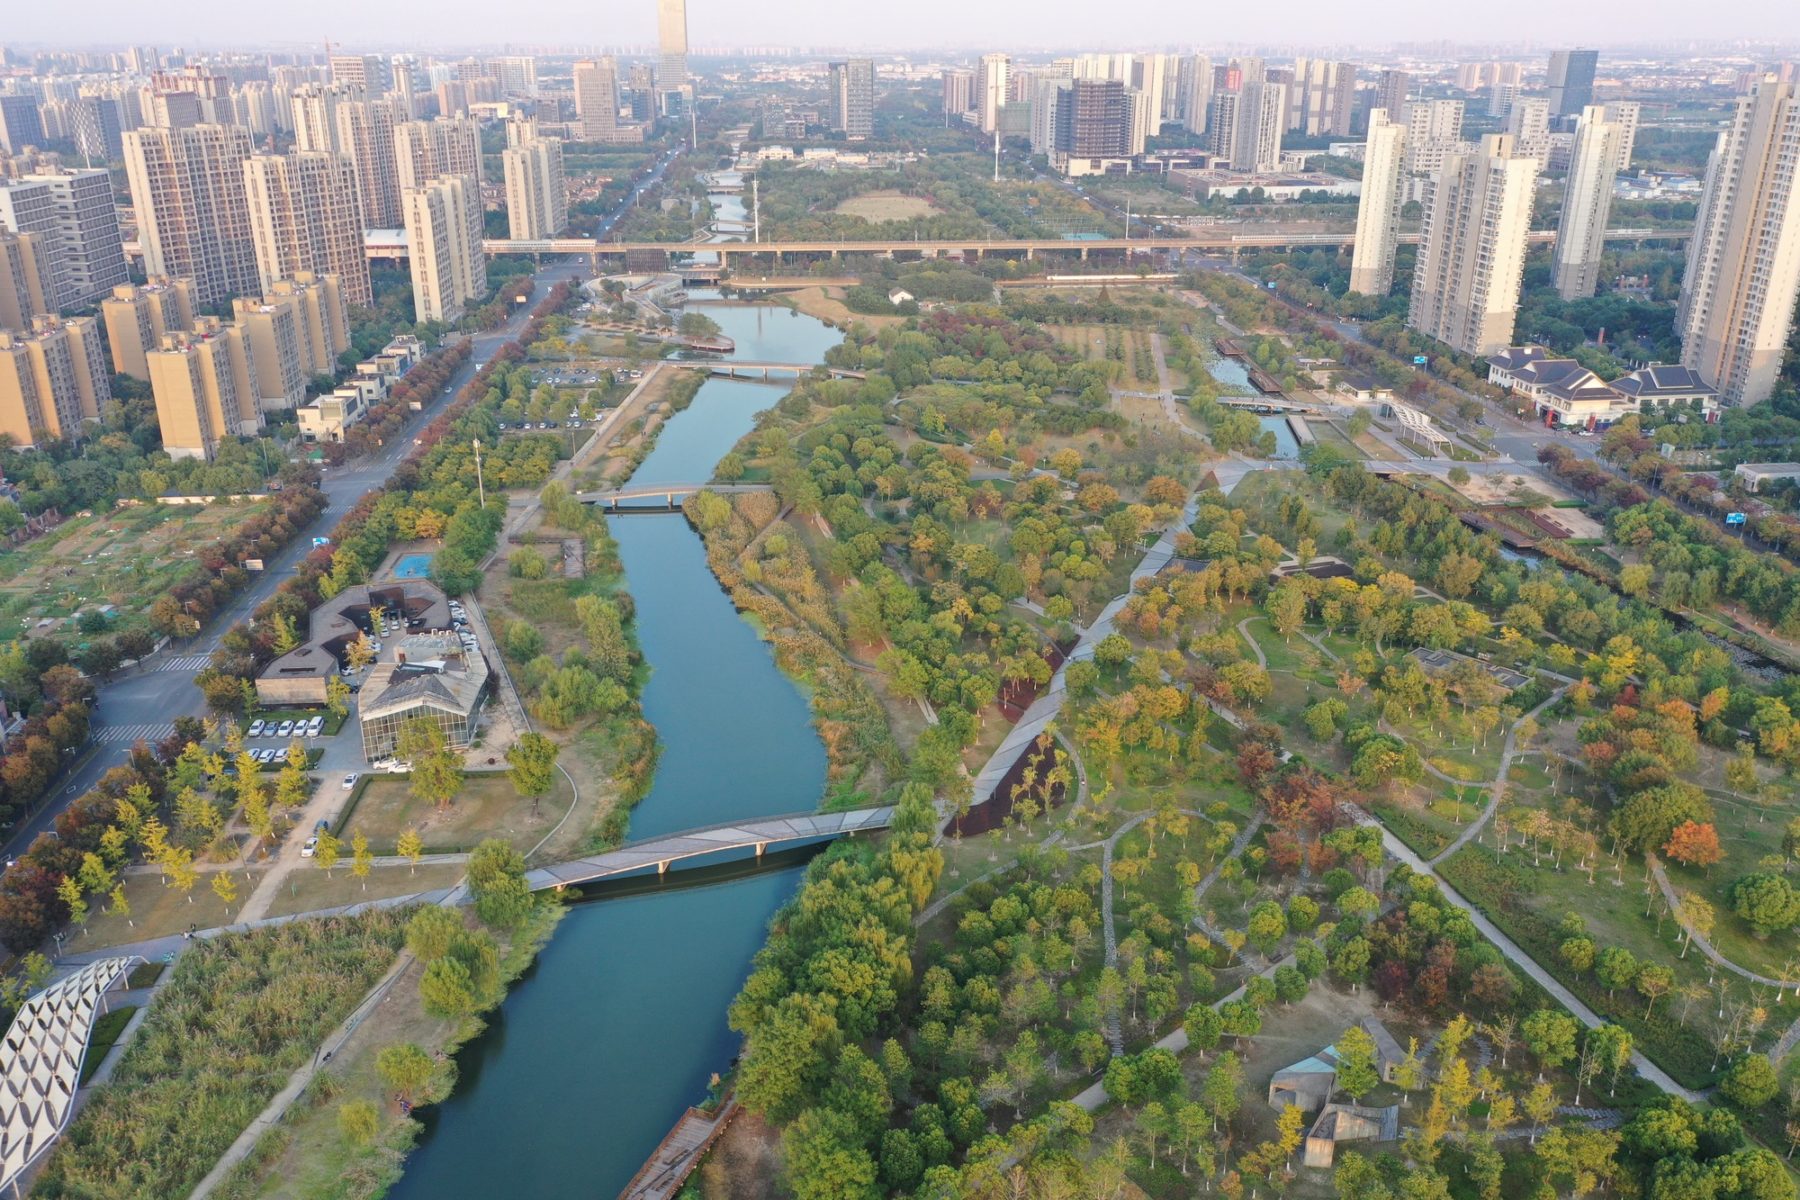 aerial photo of park looking down waterway with city context on either side